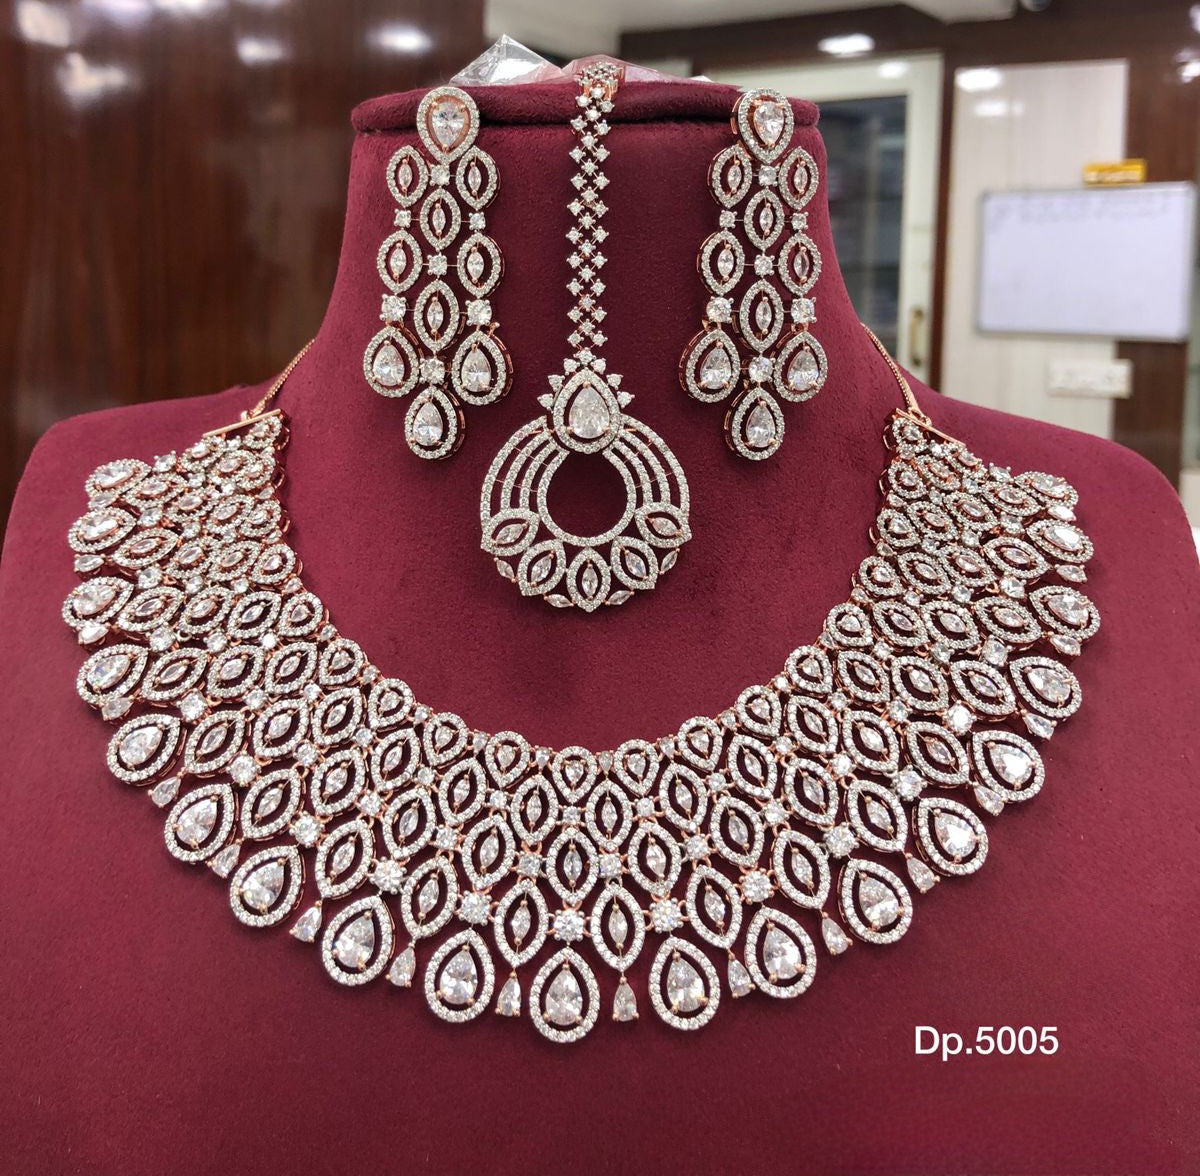 High Quality American diamond Full-bridal Necklace With Earrings and Maangtikka available in silver on rose gold polished/  green on silver polished